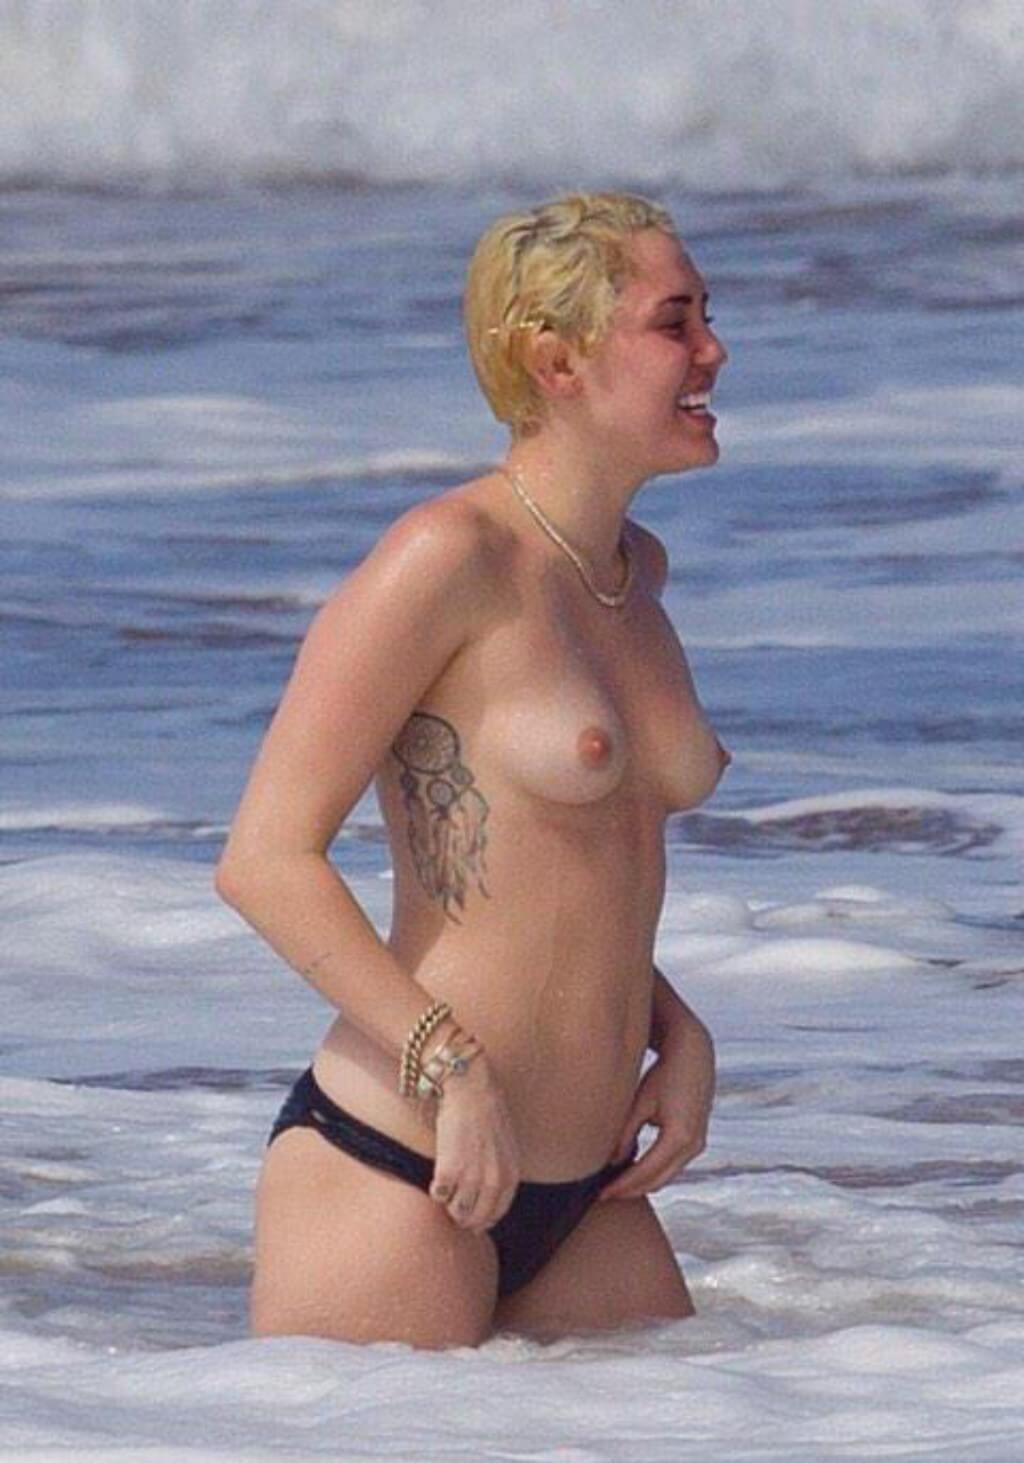 Miley strips touches herself